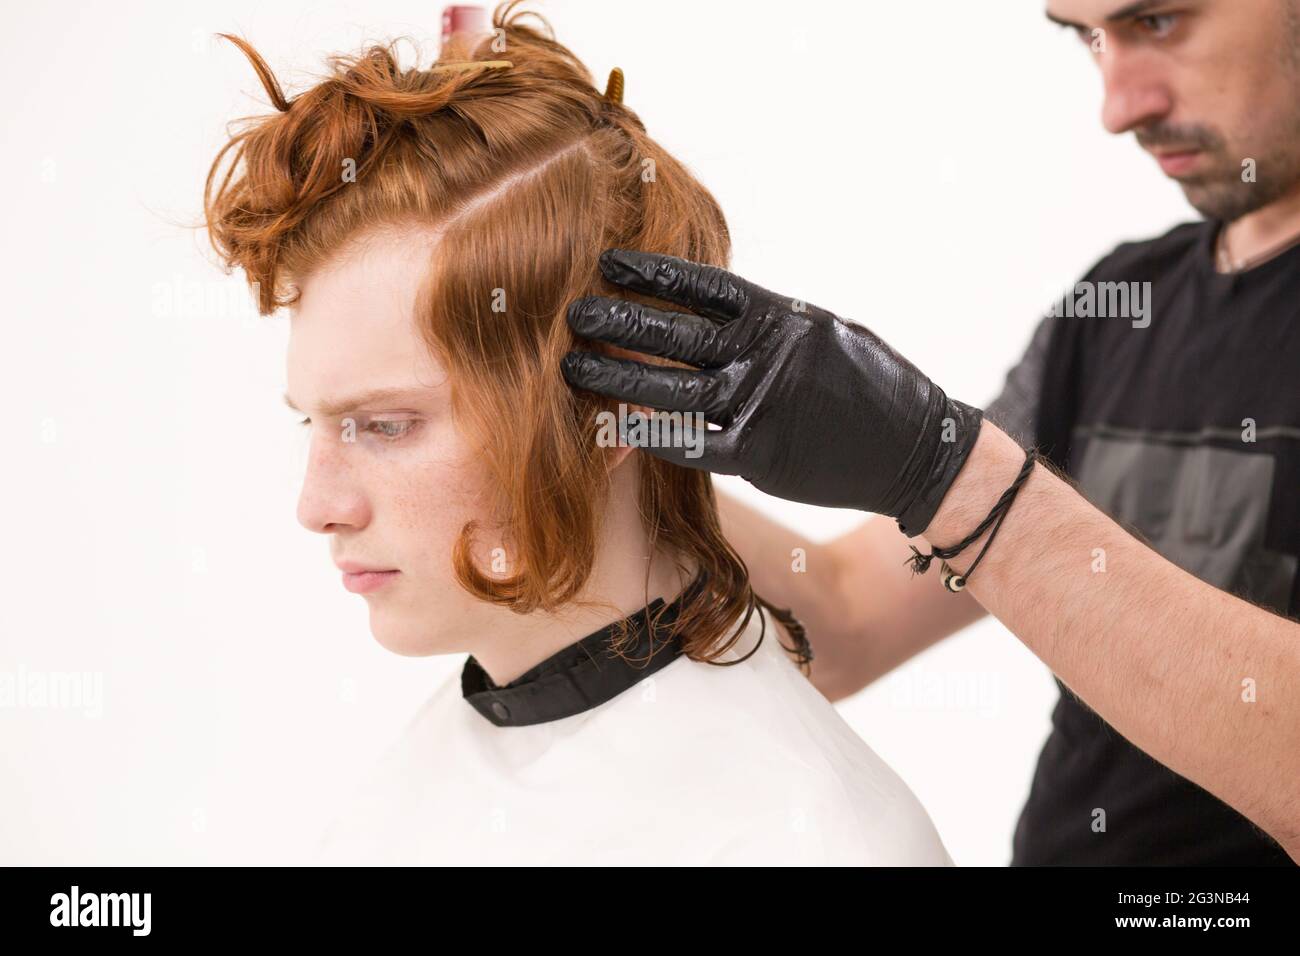 Barber pinning a hair of his client with a hairpin Stock Photo